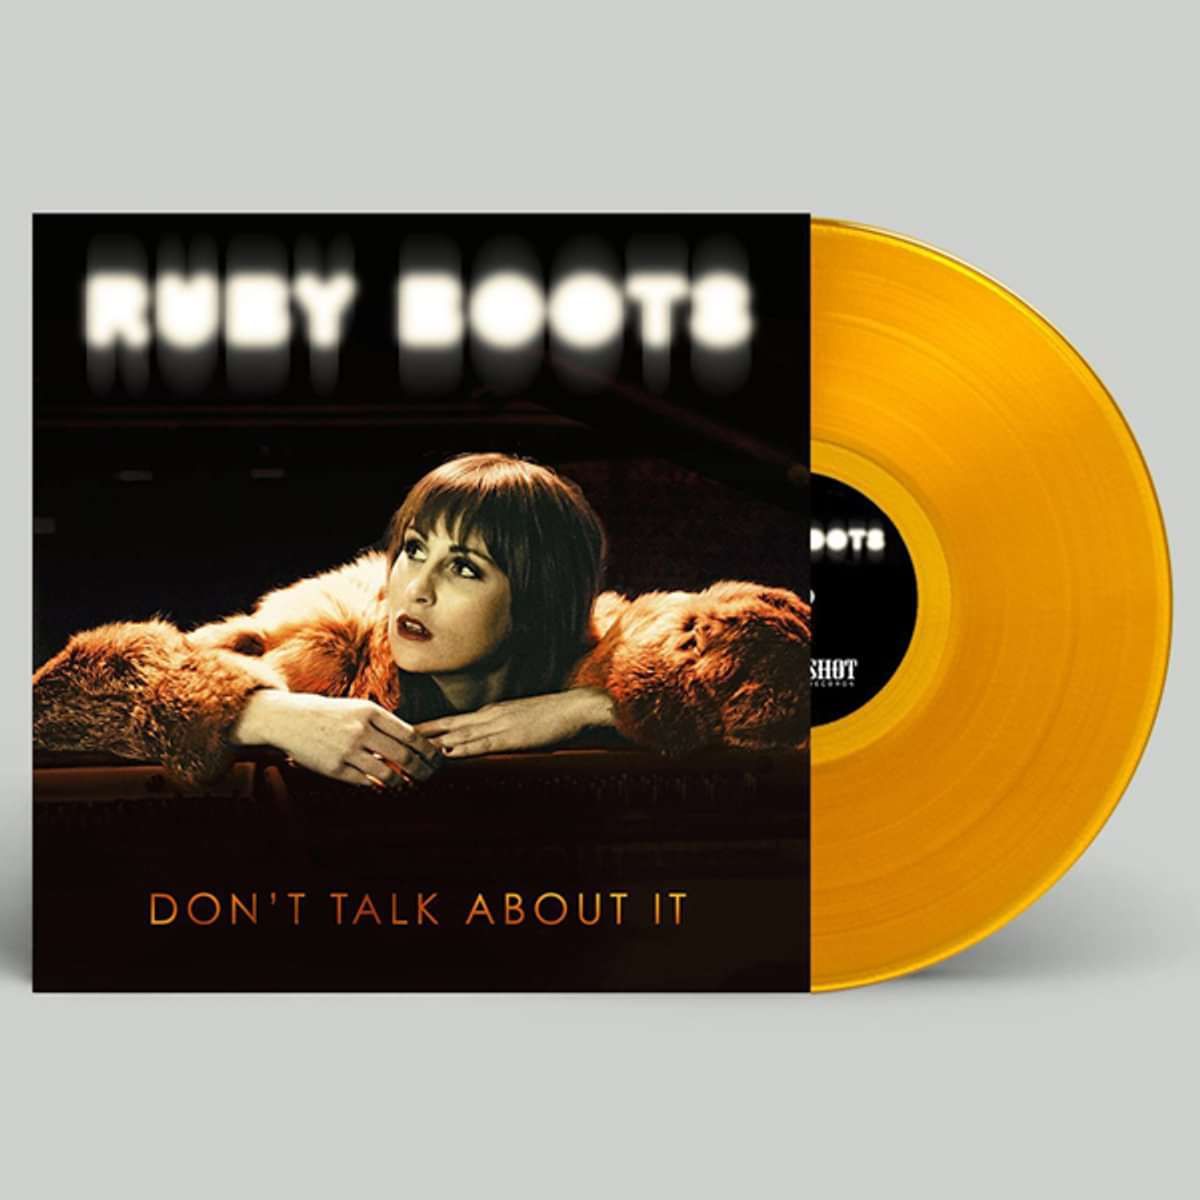 Don't Talk About It - 12" Orange Deluxe Vinyl - Ruby Boots